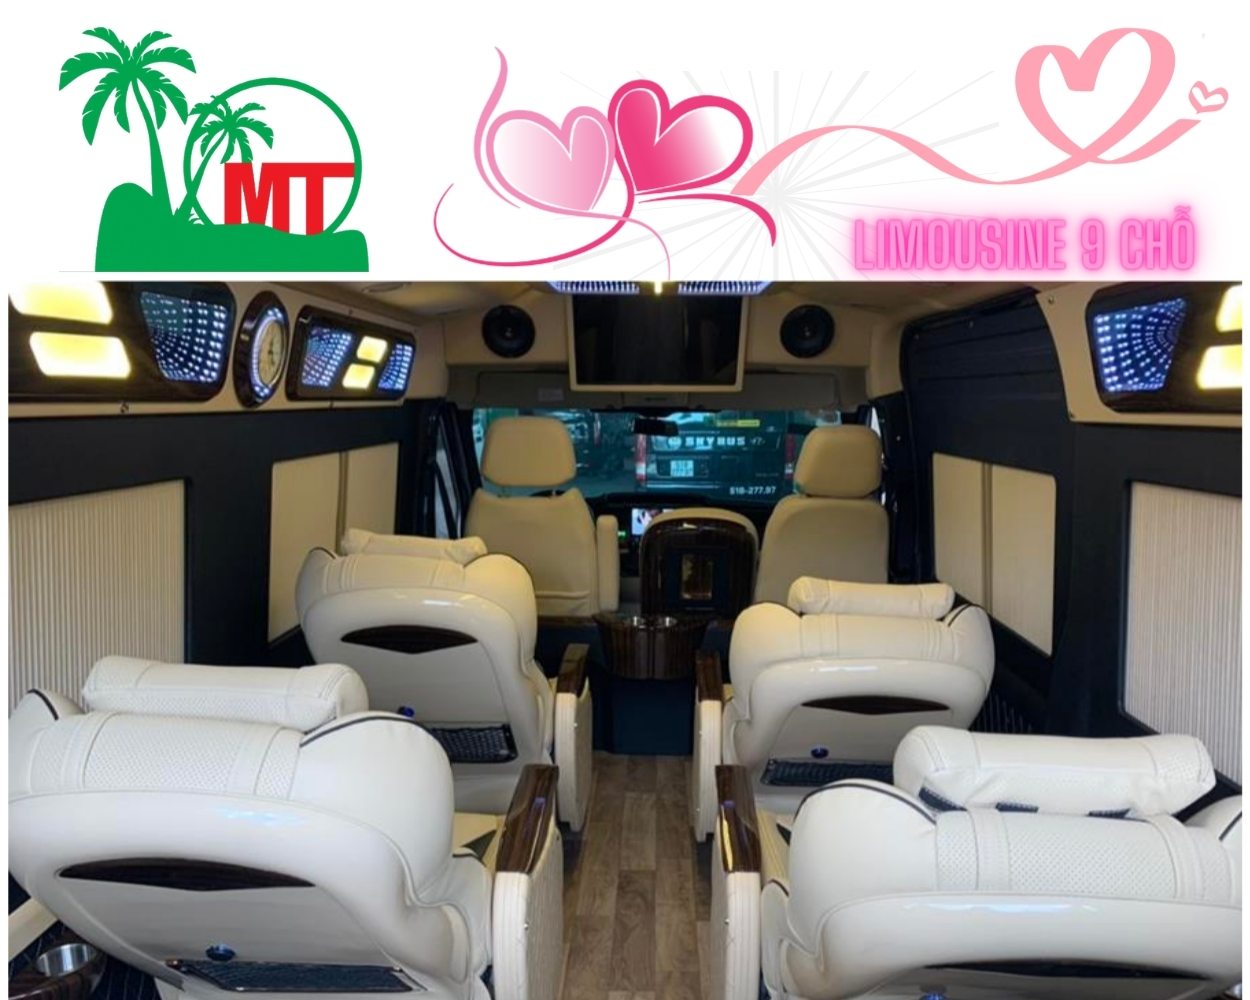 Renting an 11-Seater Limousine - Premium service for important events